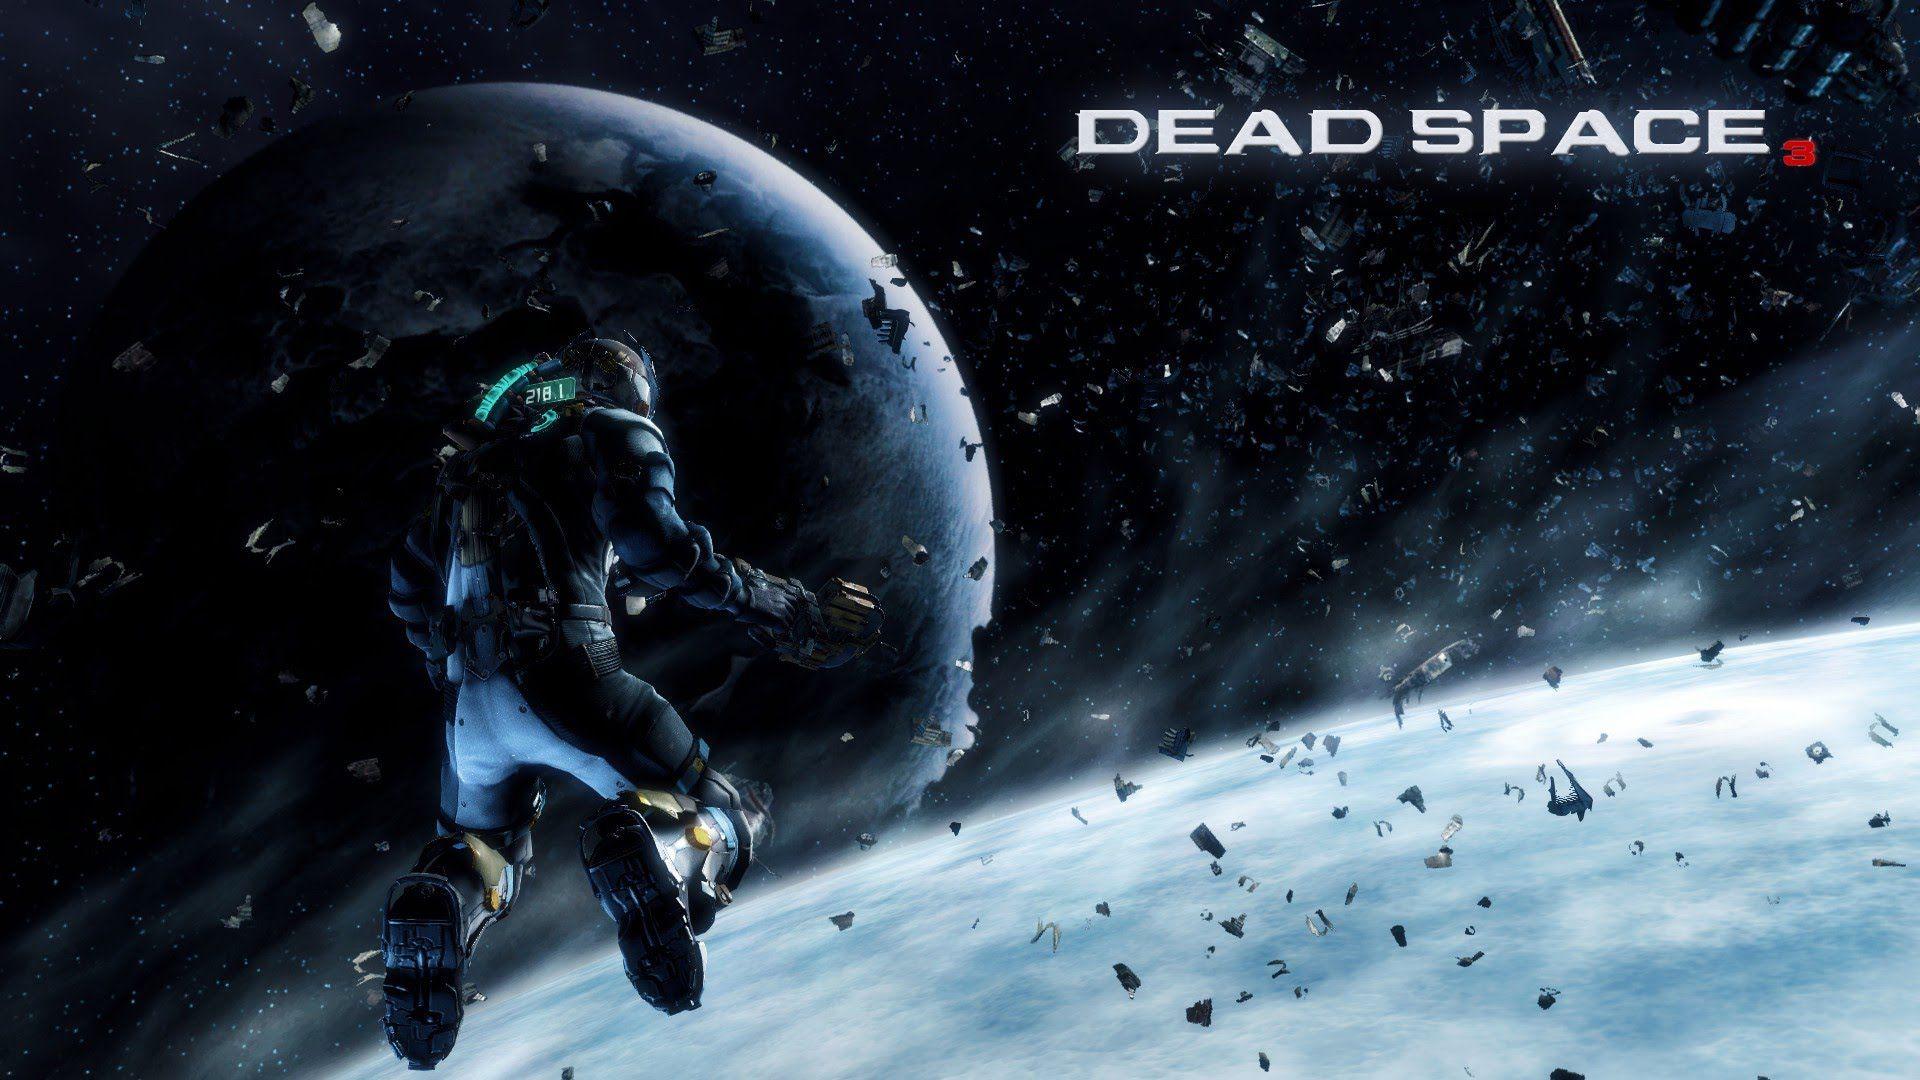 Dead Space 3 The Movie HD All Cutscenes and Boss Fights